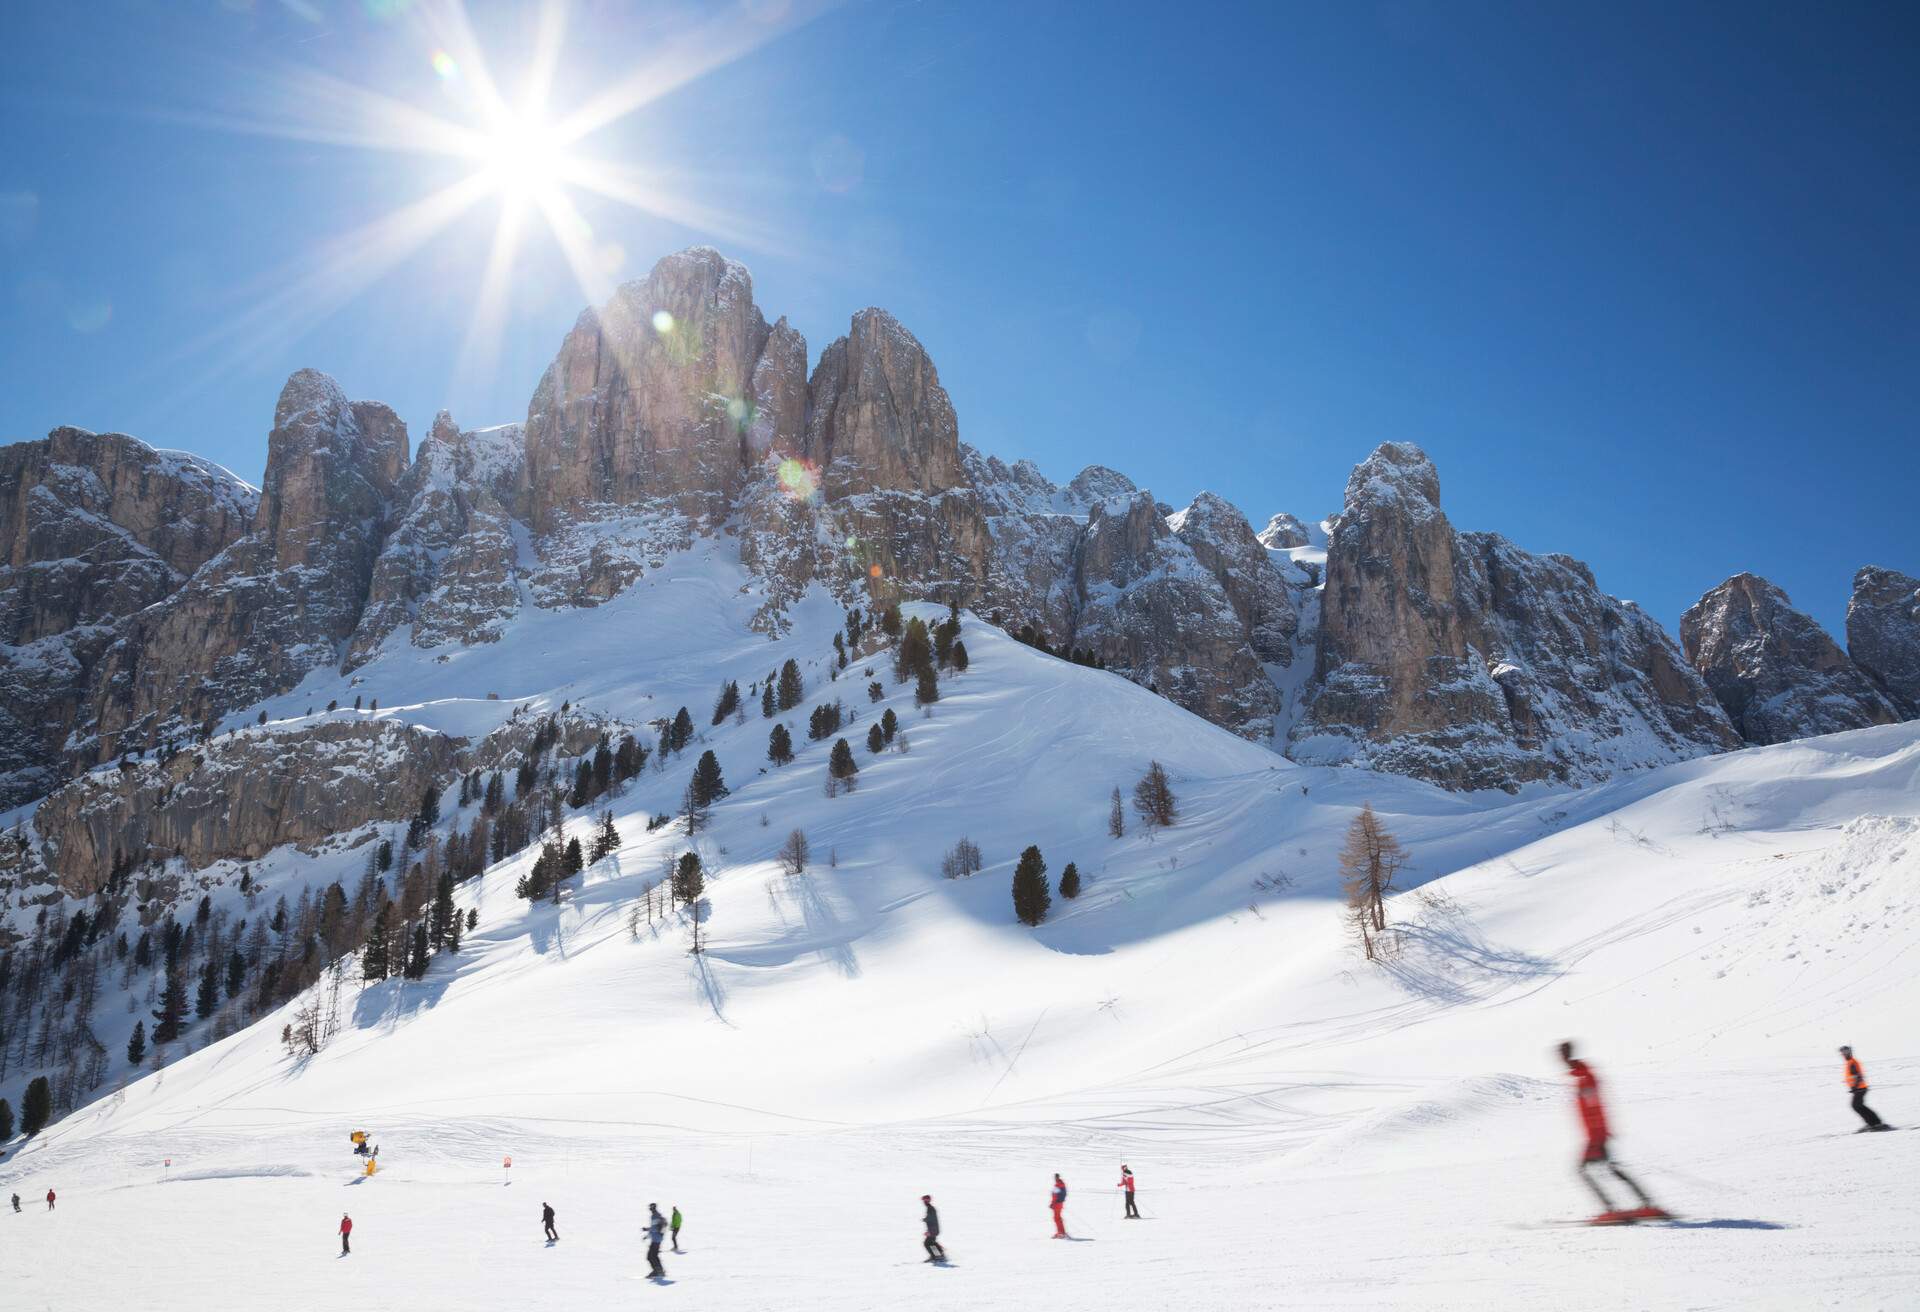 People skiing on a slope backed by a rocky massif in broad daylight.